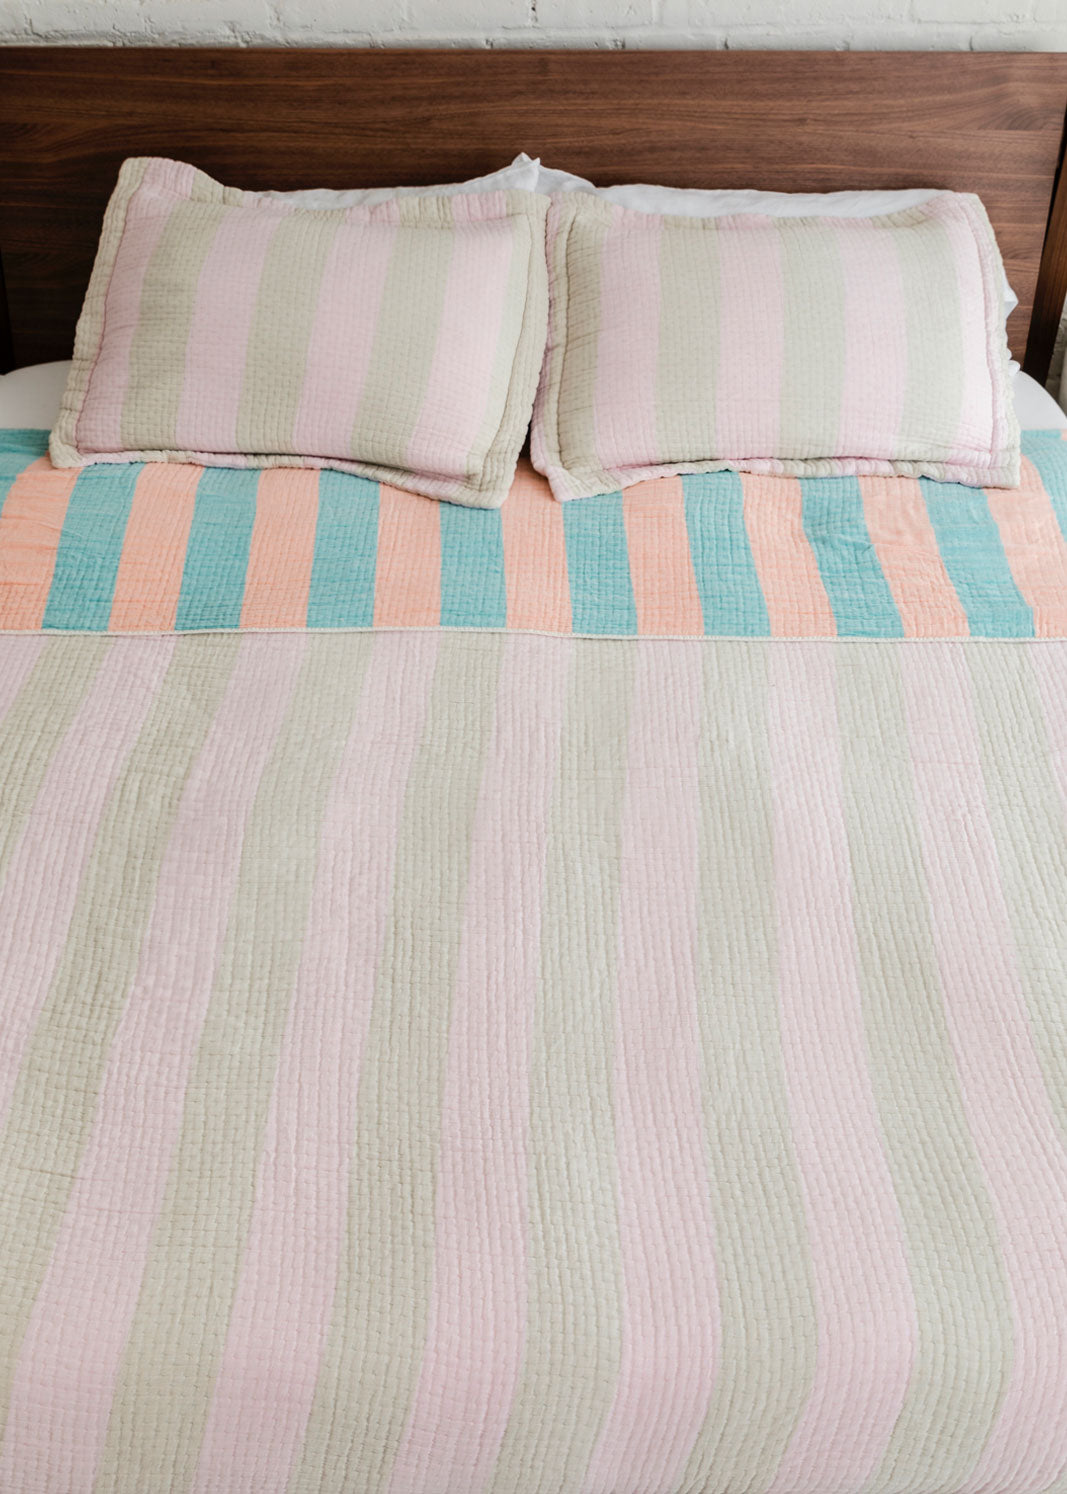 Dusen Dusen Warm Stripe Coverlet Set in reversible stripe colorways. Pink and beige stripes on one side, orange and green stripes on the other side. Woven matelassé coverlet with an inner layer of insulation for a quilted effect. Stonewashed, with an extra soft and gauzy hand feel. 100% cotton shell, polyester fill. Machine wash cold and tumble dry low. Made in Portugal.  Coverlet and shams are sold separately;